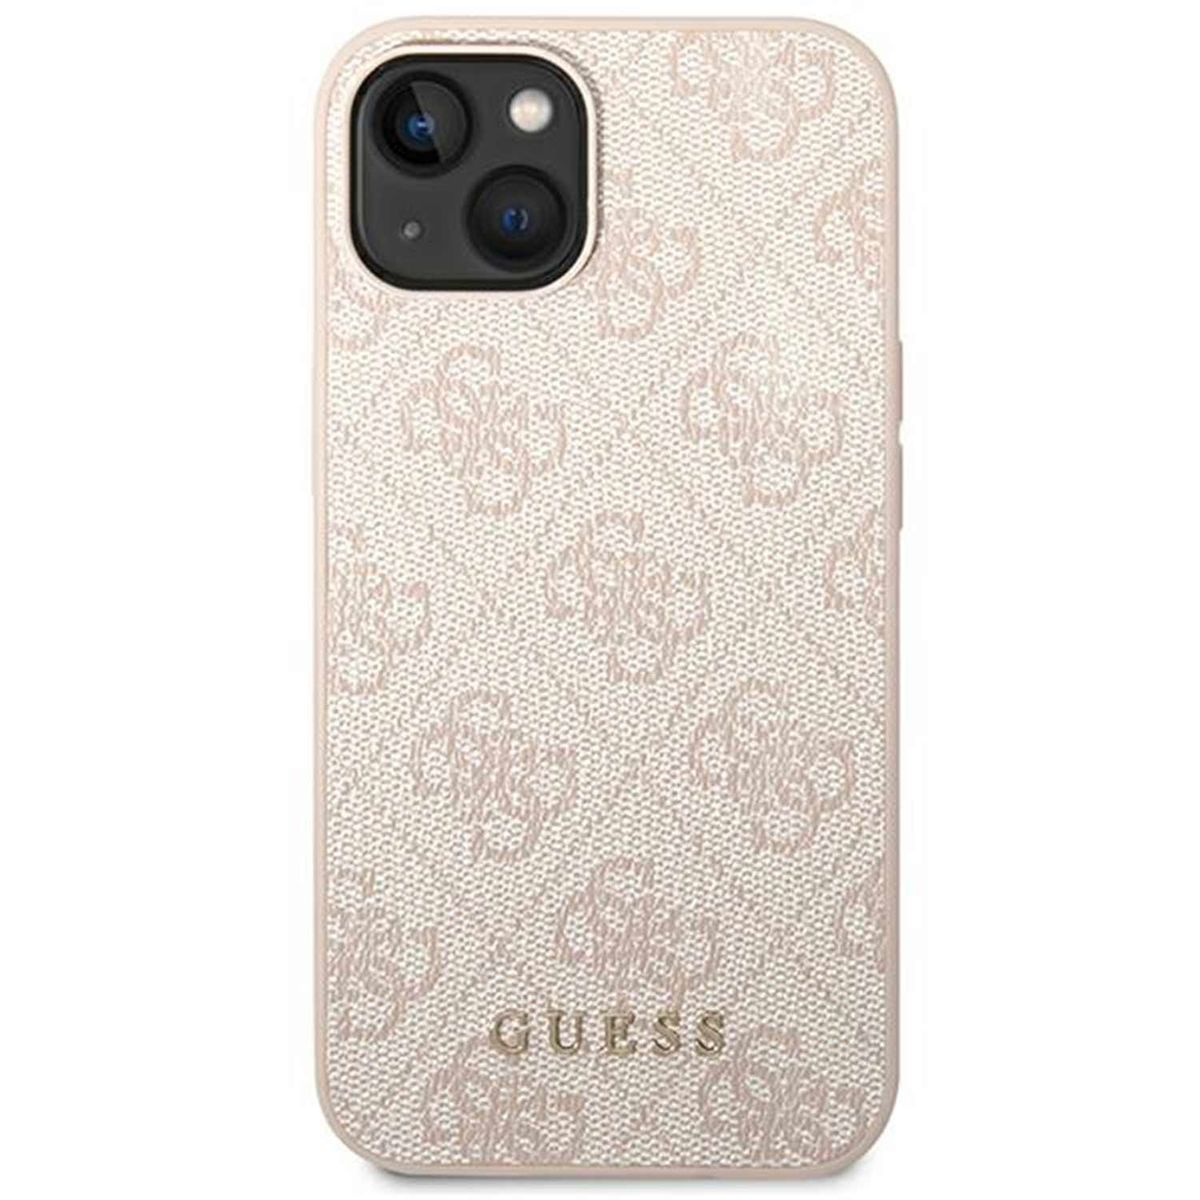 Logo 14 Gold Backcover, Rosa iPhone Hülle, GUESS Apple, Plus, Metal